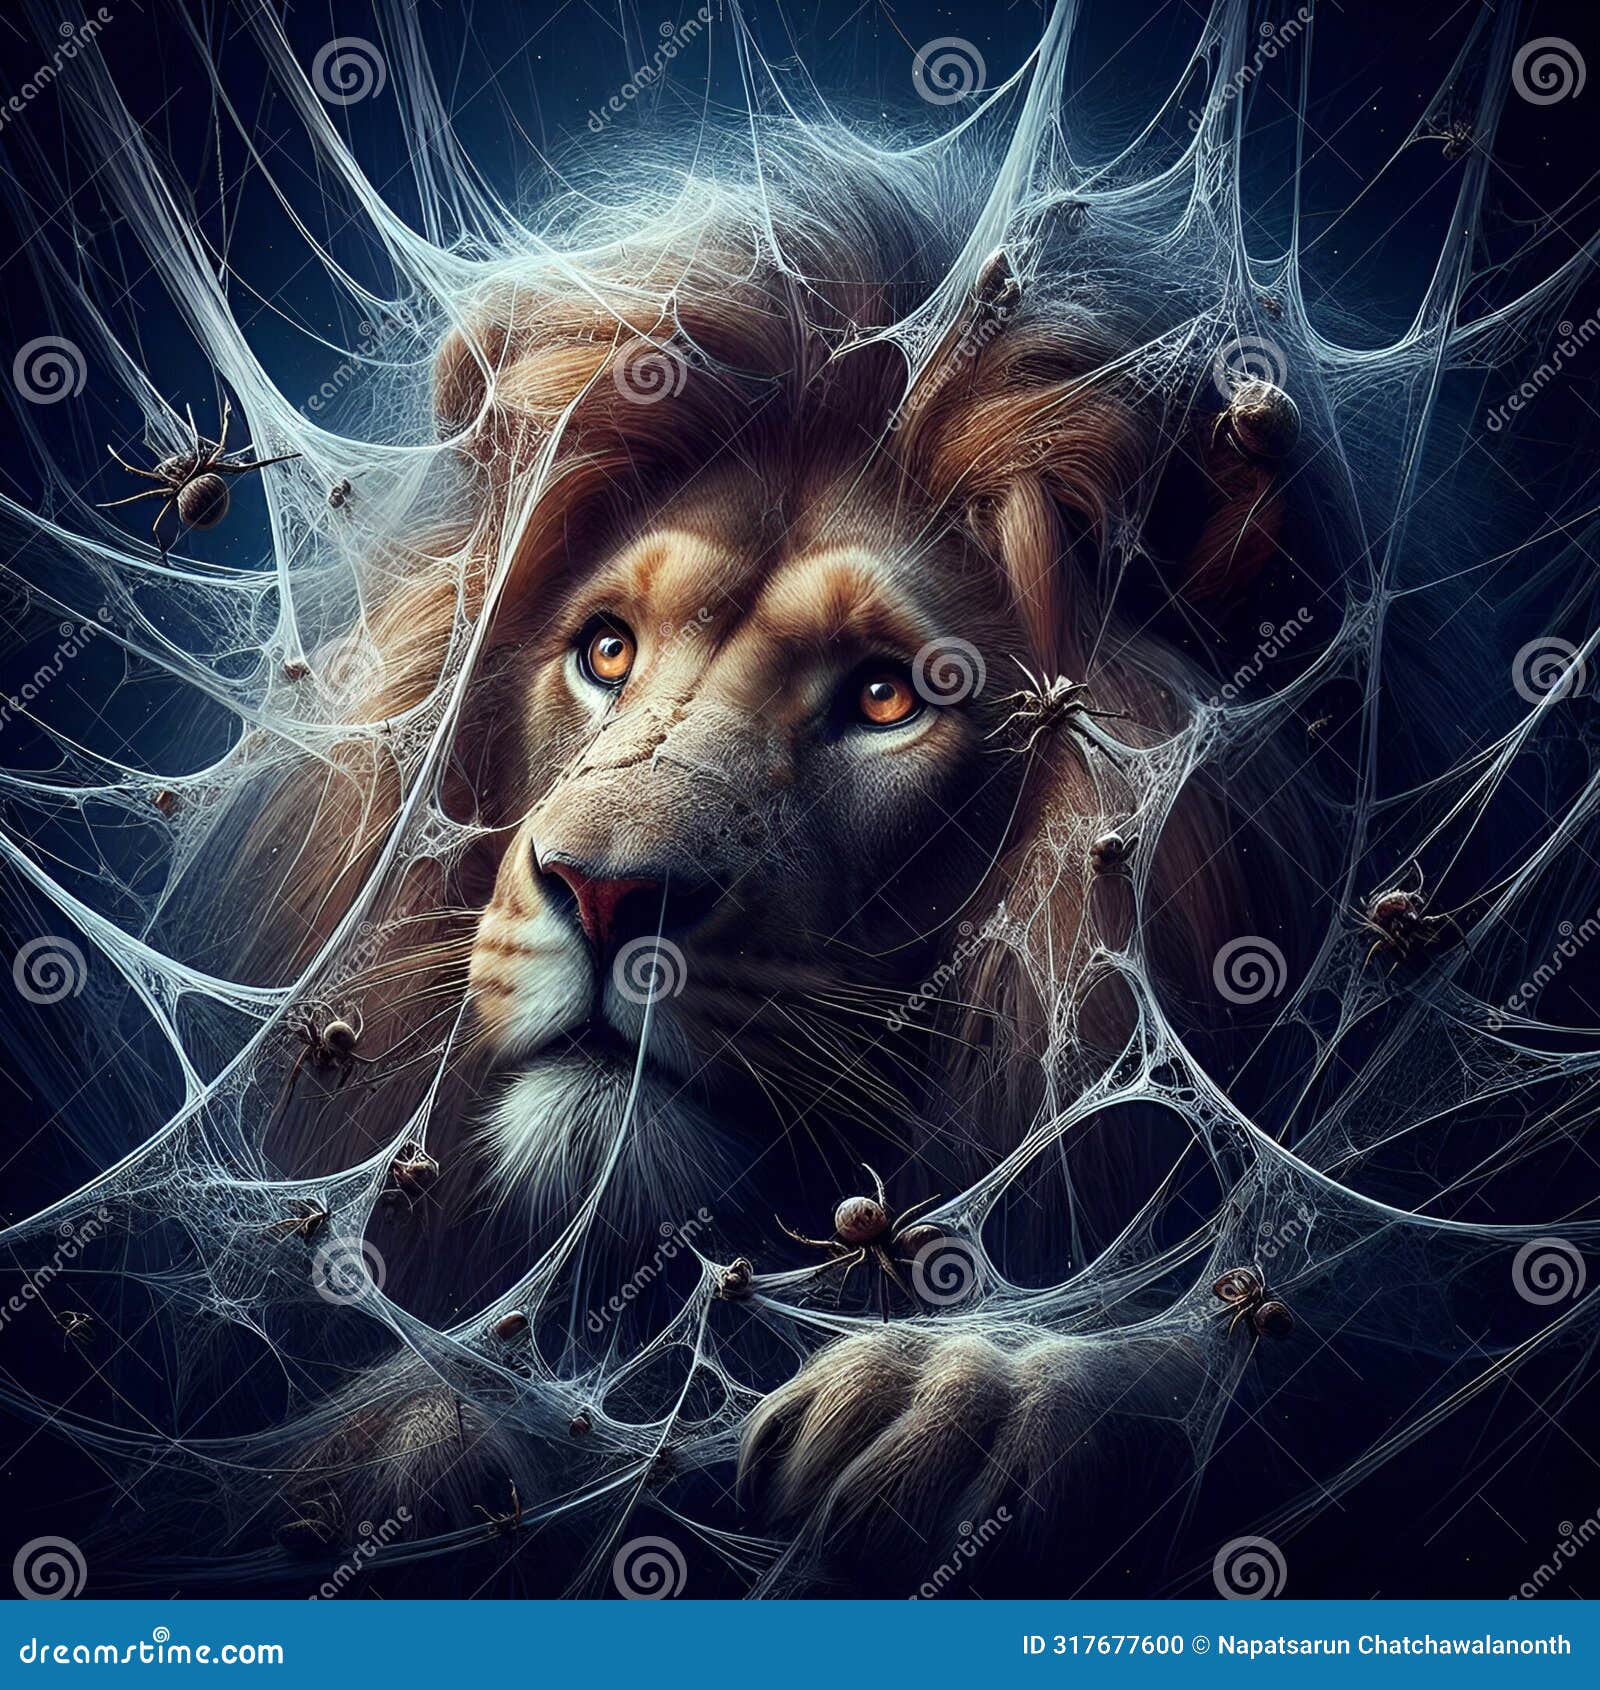 nature's paradox: the lion trapped by the mighty spider.